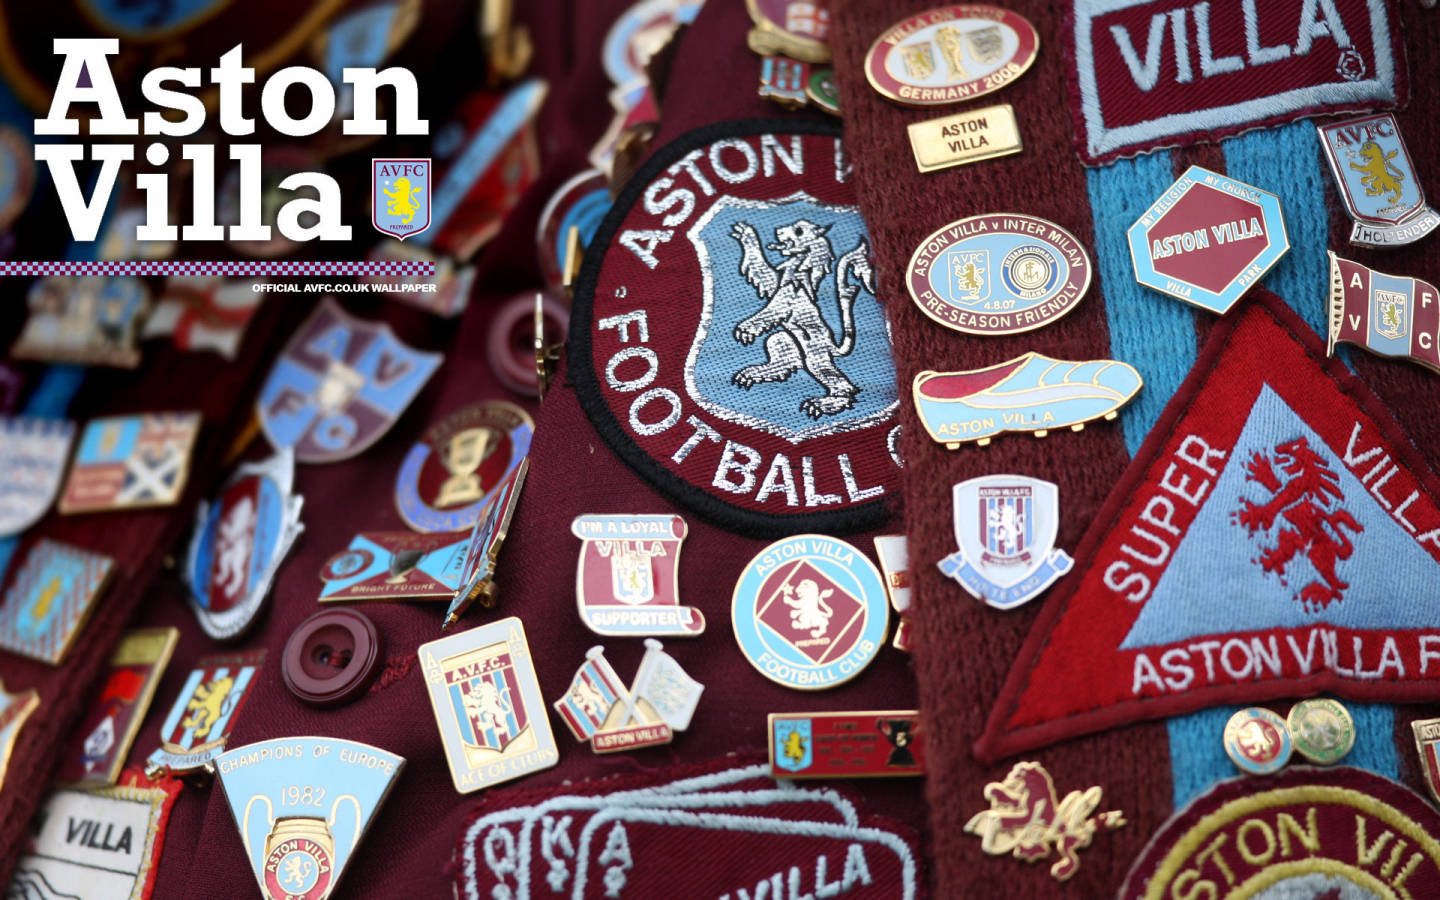 Astonvilla Fc-patches Would Be Translated To 